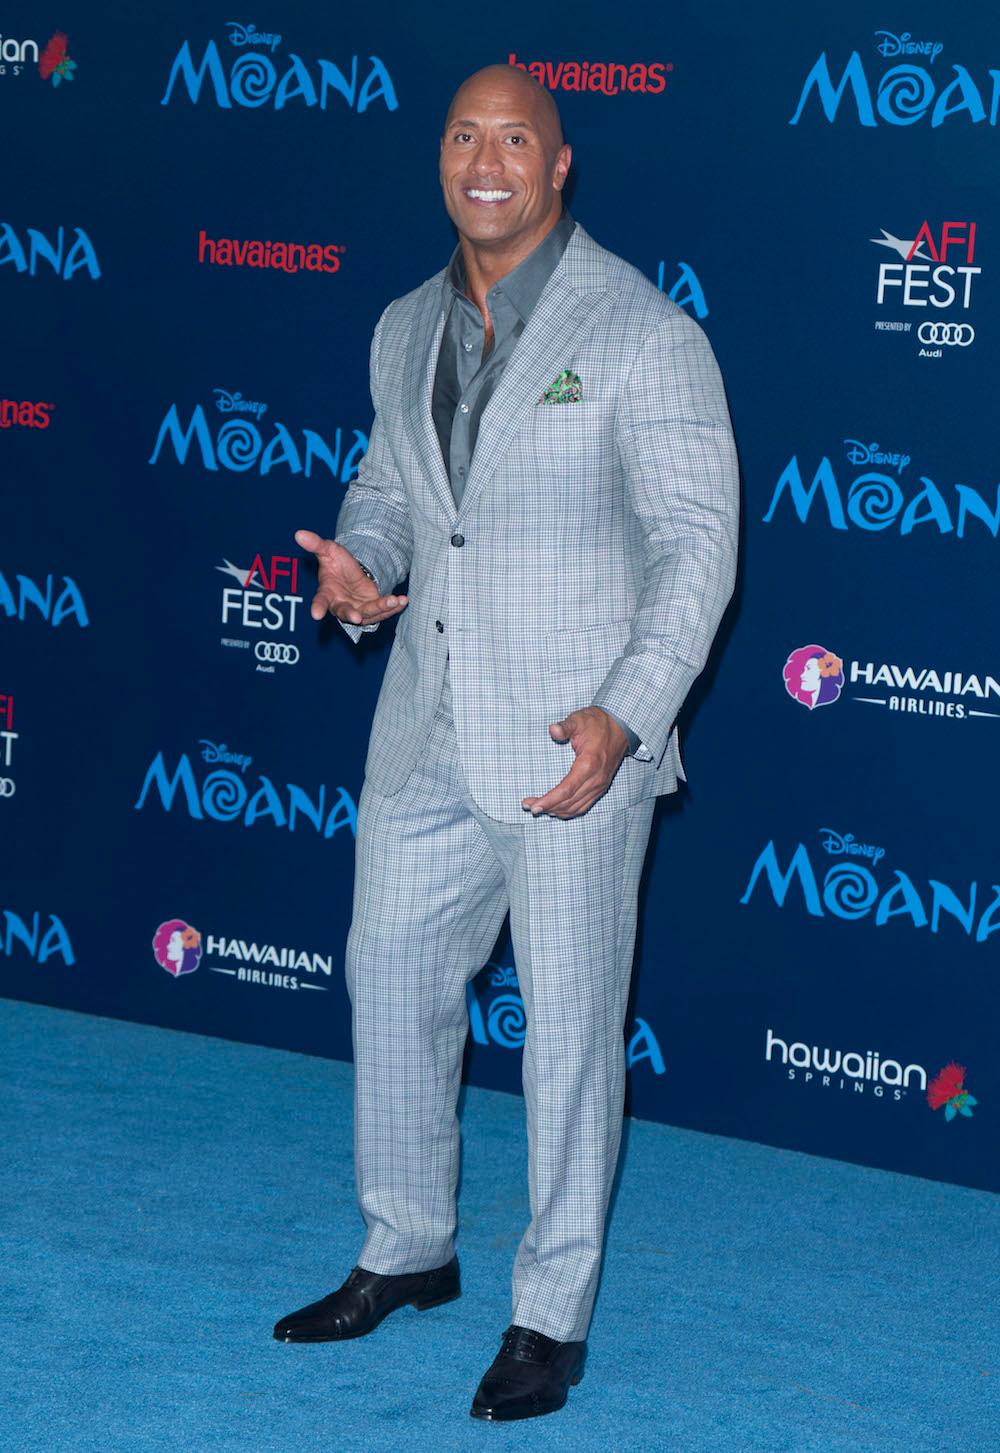 Johnson attends the Disney premiere of "Moana" in Hollywood, California, on Nov. 14, 2016. (©Getty Images | <a href="https://www.gettyimages.com/detail/news-photo/actor-dwayne-johnson-attends-the-disney-premiere-moana-in-news-photo/623331624">LILLY LAWRENCE/AFP</a>)